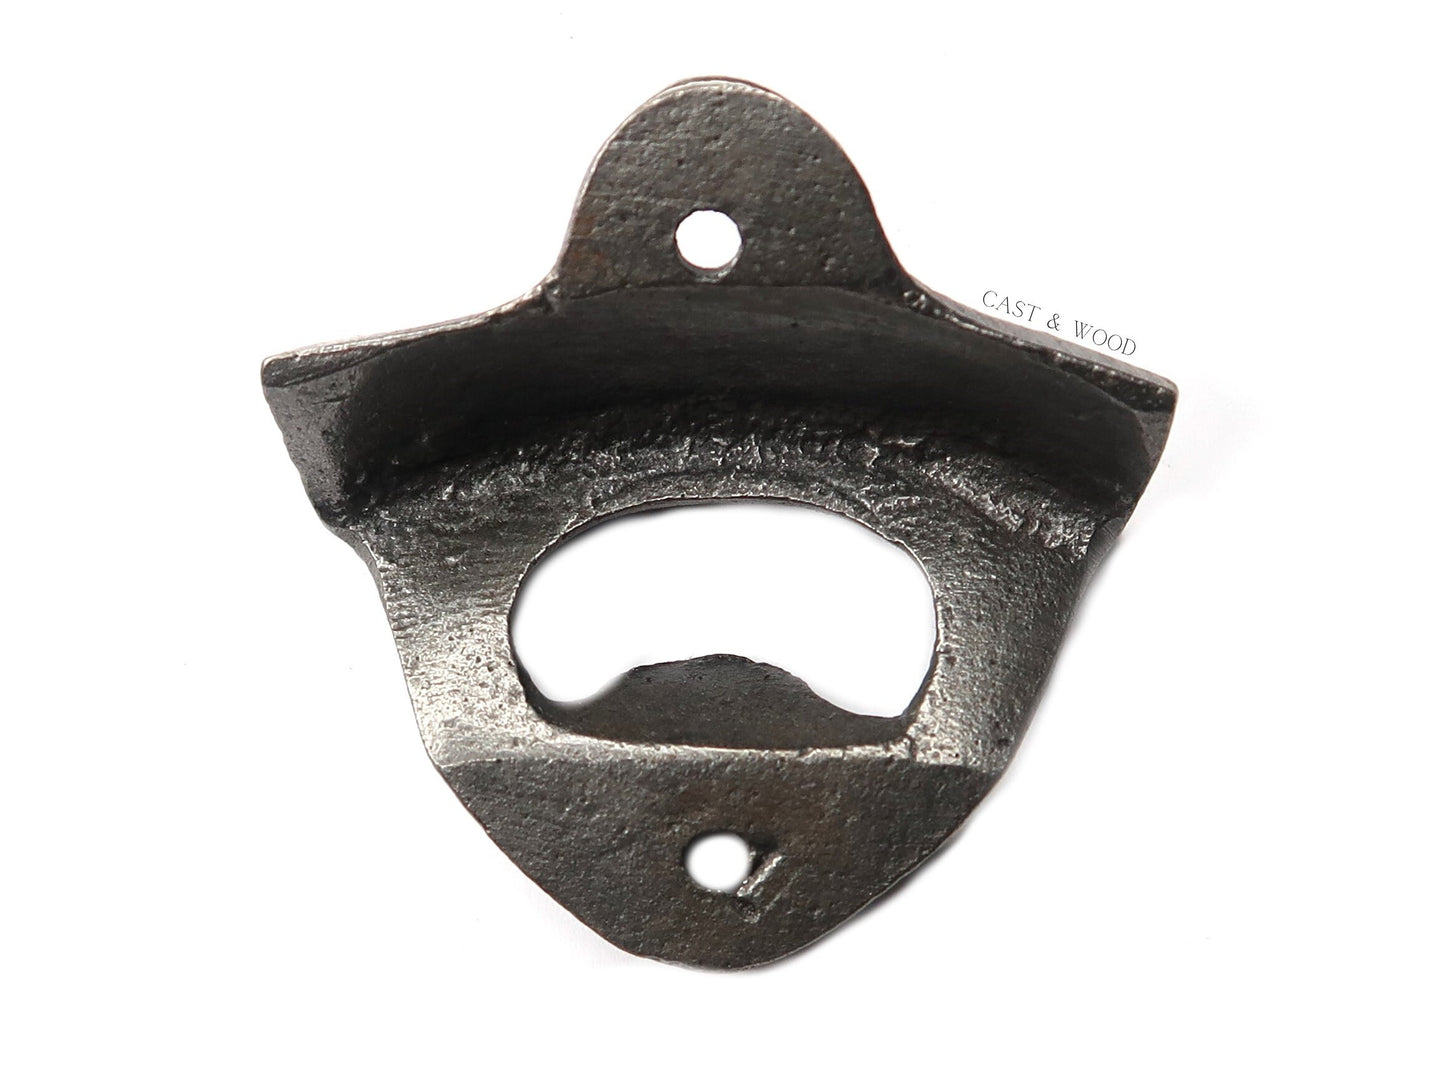 CHEERS Cast Iron Wall Mounted Bottle Opener freeshipping - Cast & Wood